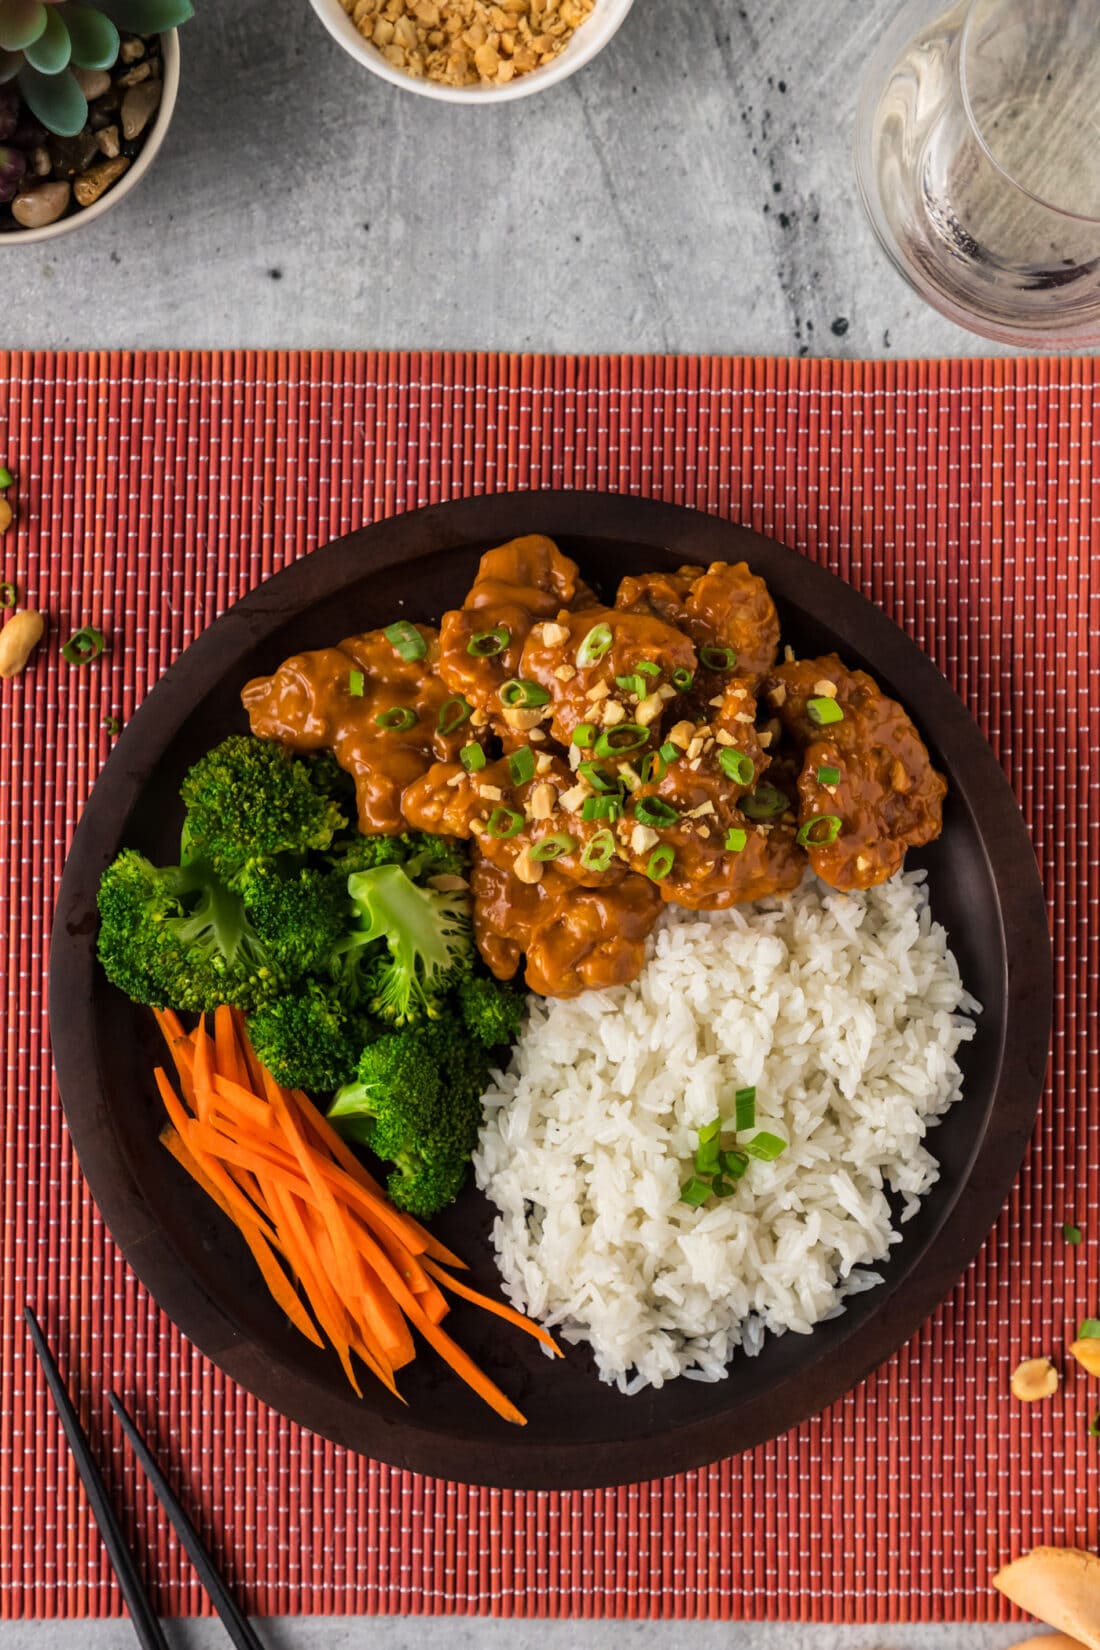 Plate of Peanut Butter Chicken with rice and vegetables